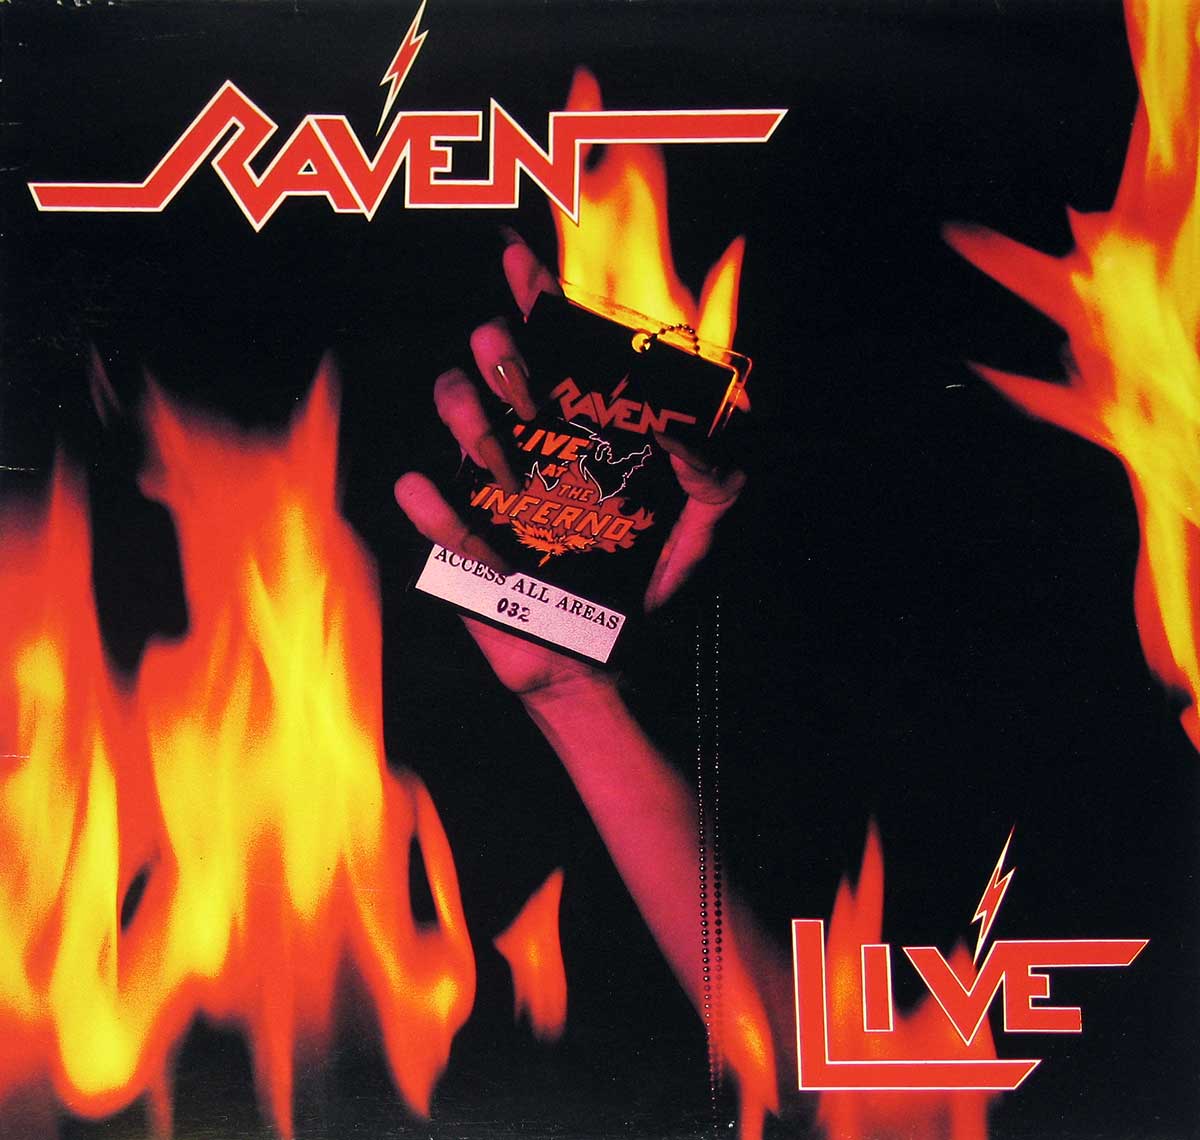 large album front cover photo of: Raven  Live at the Inferno 